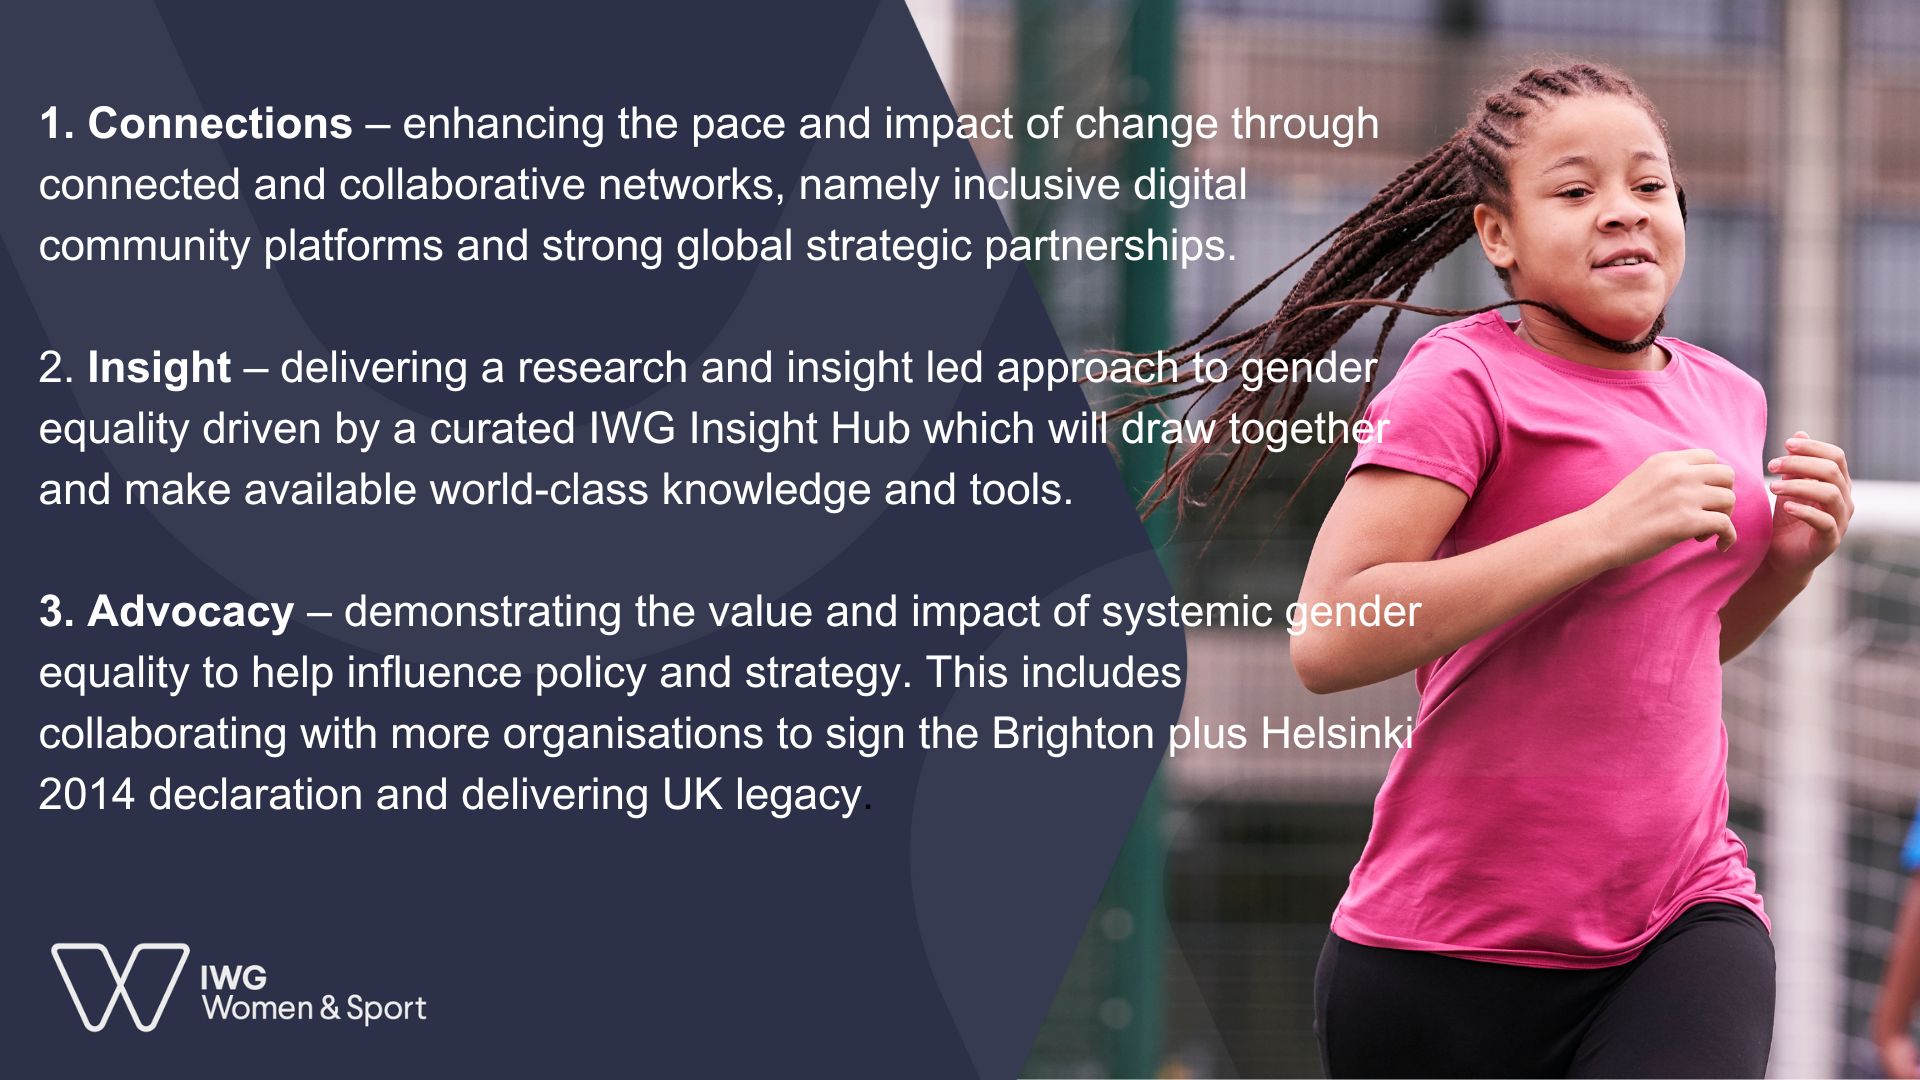 A blue background with white writing, listing the 3 strategic aims of IWG Women and Sport (Connection, Insight, Advocacy). On the right, an image of a woman wearing a pink top, running. 